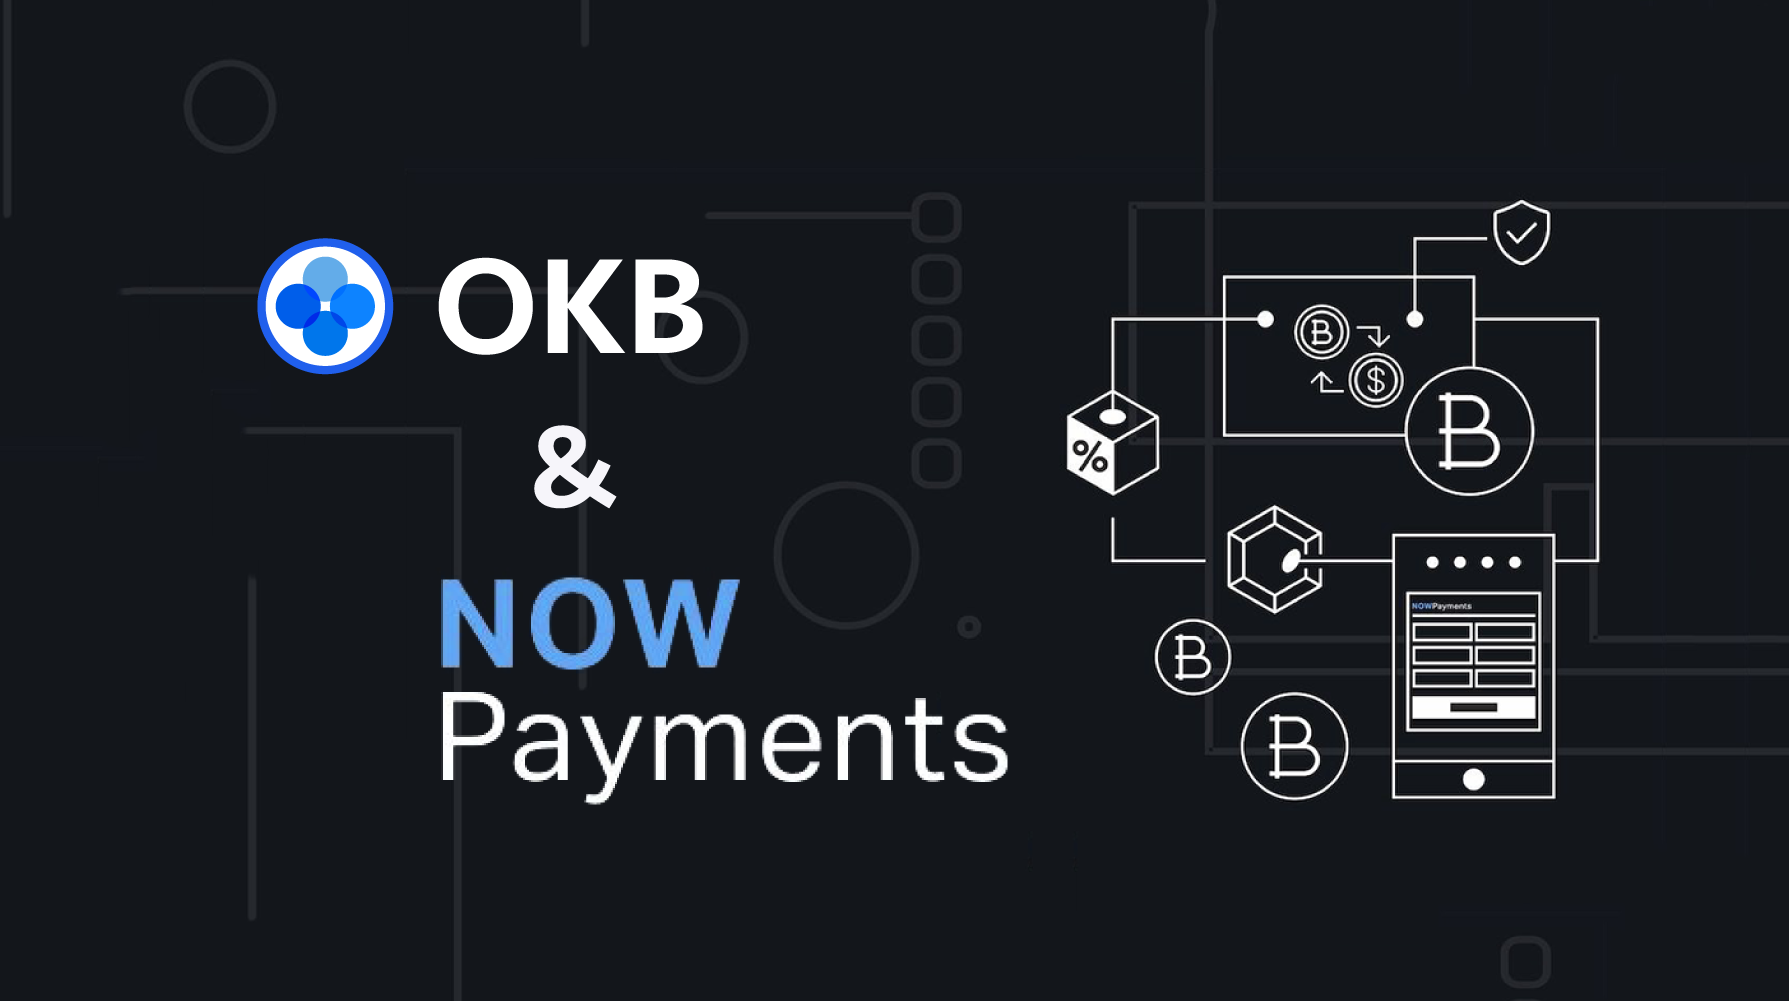 Global utility token OKB teams up with crypto payments service NOWPayments